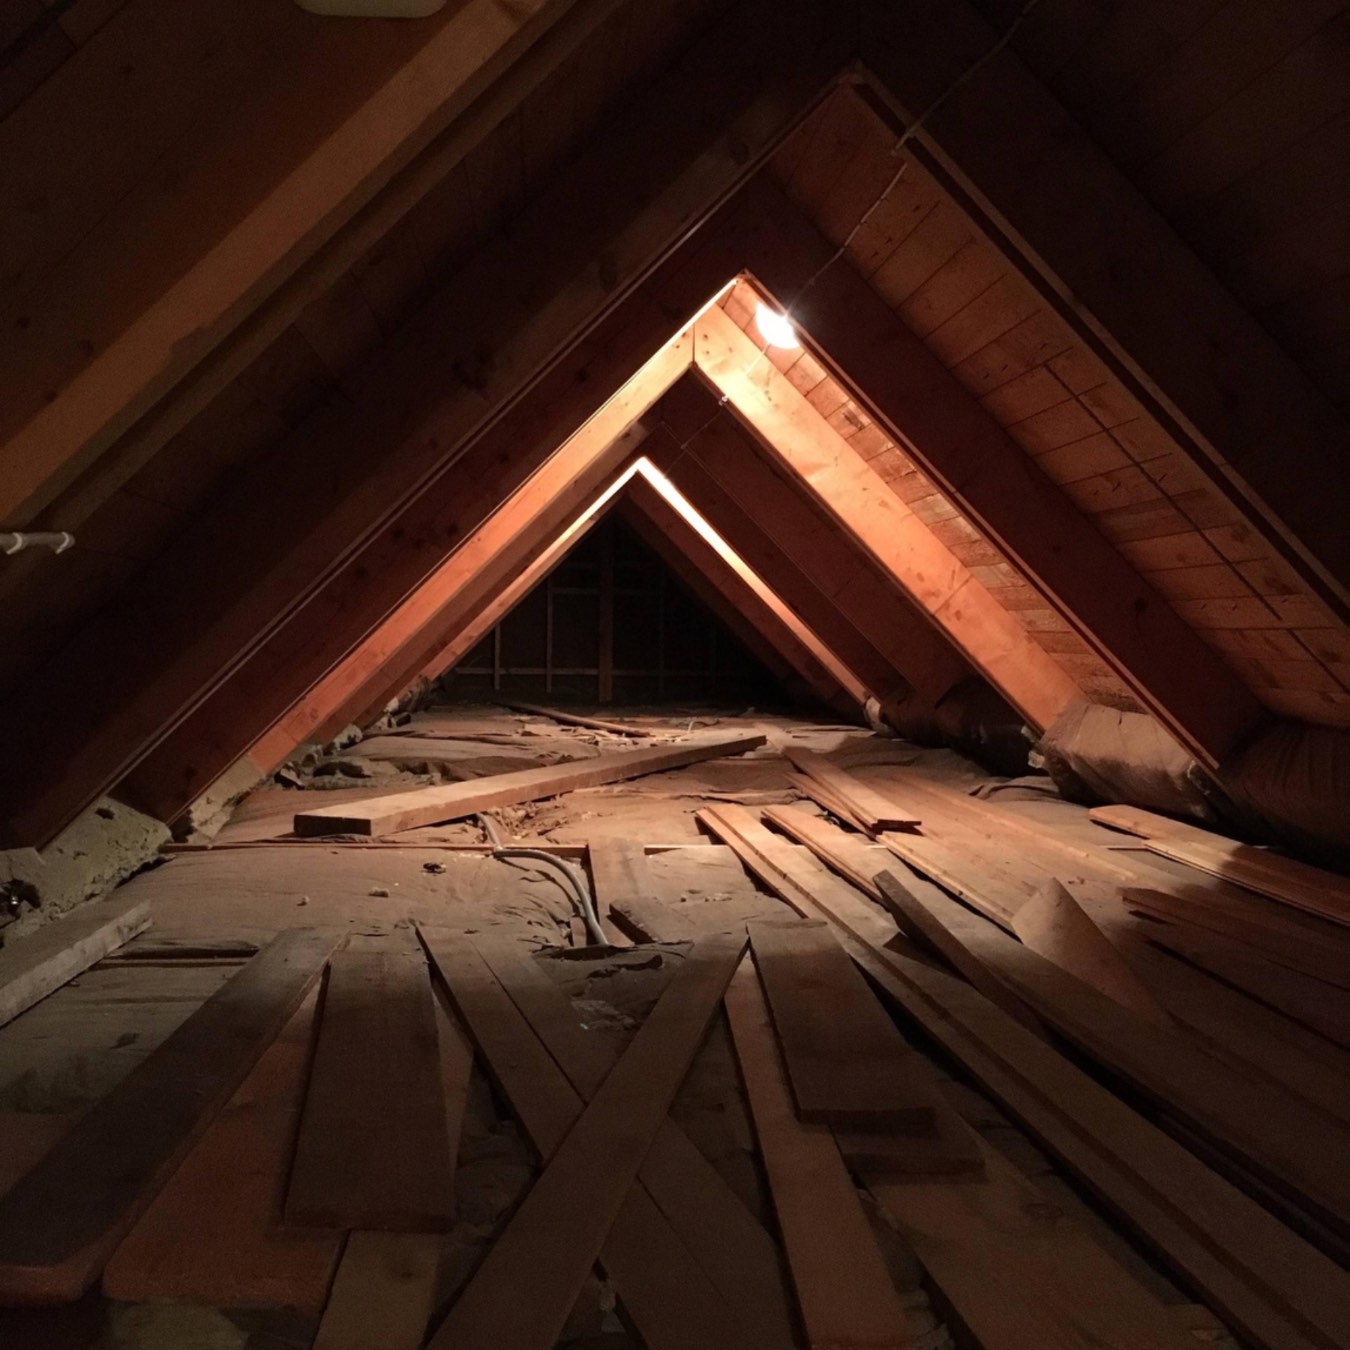 How To Remove Mold From Plywood In Attic